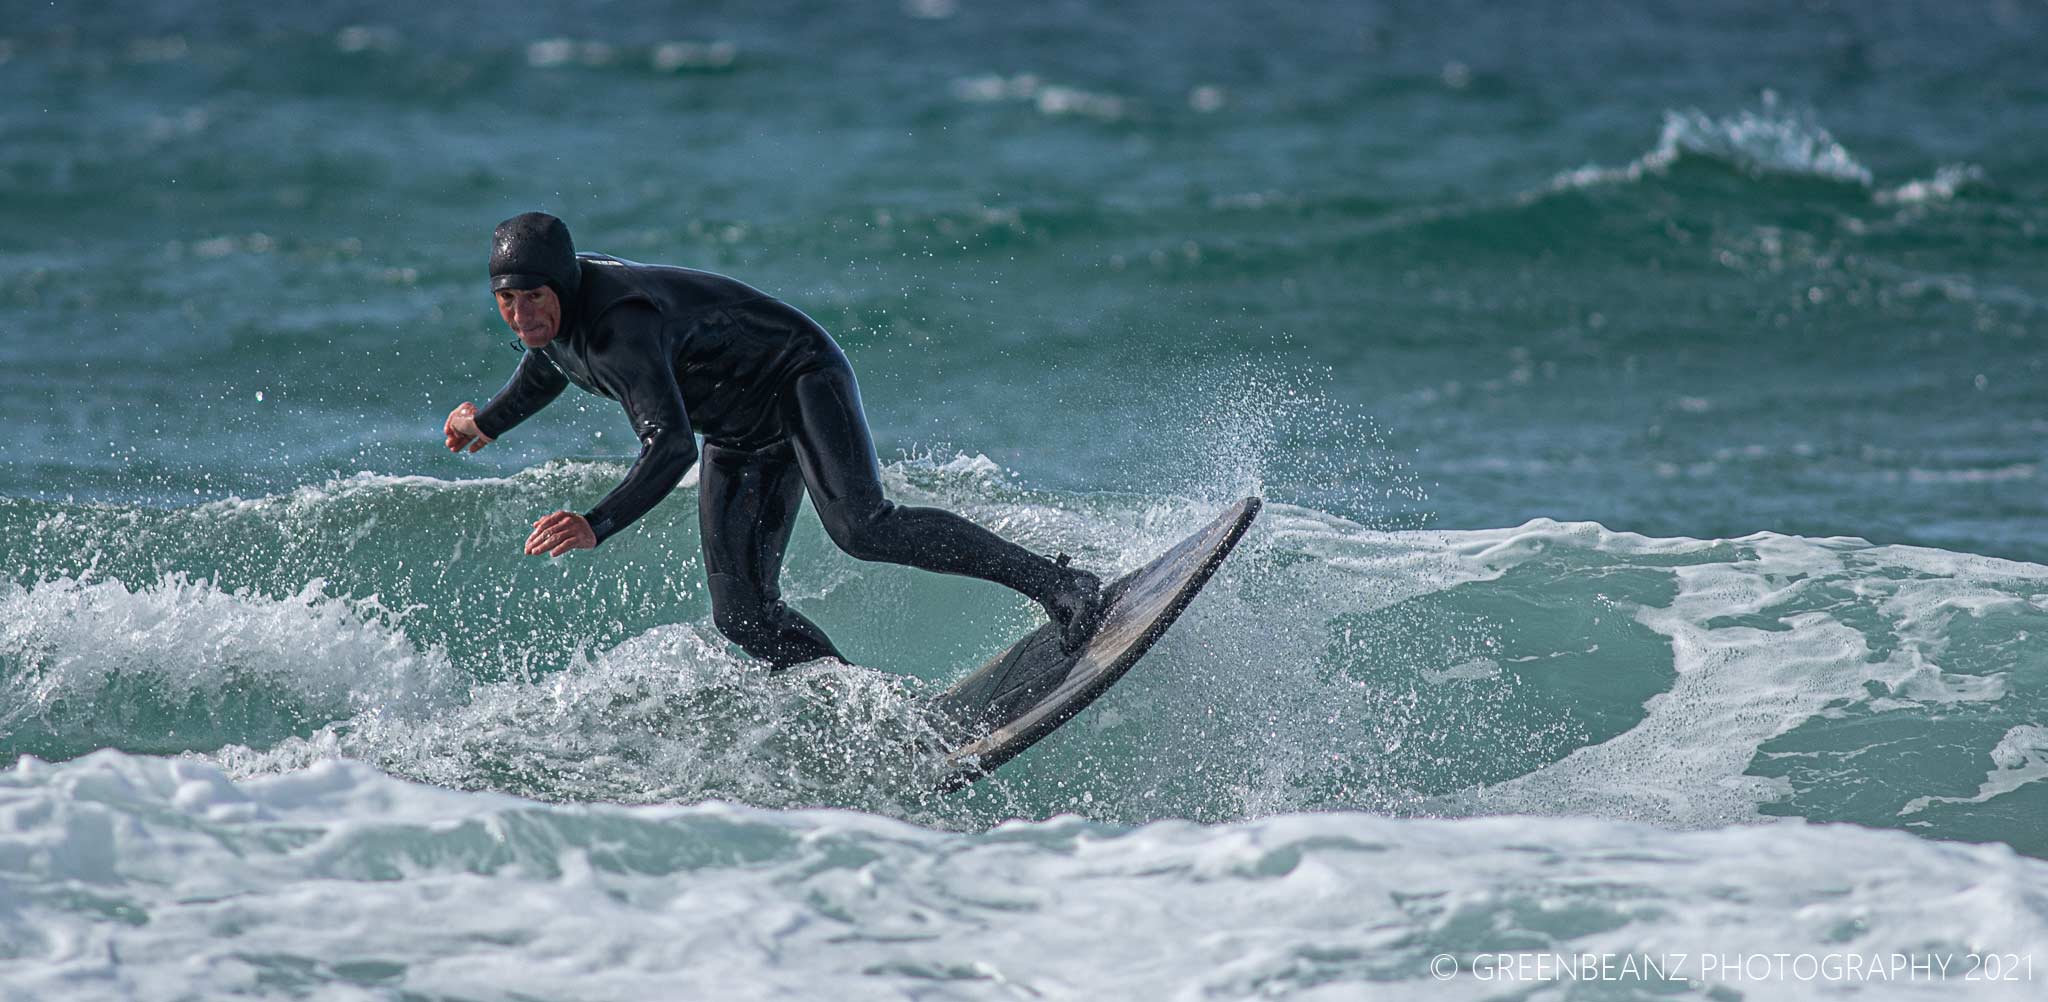 Surfer at Fistral Beach in Cornwall 2021